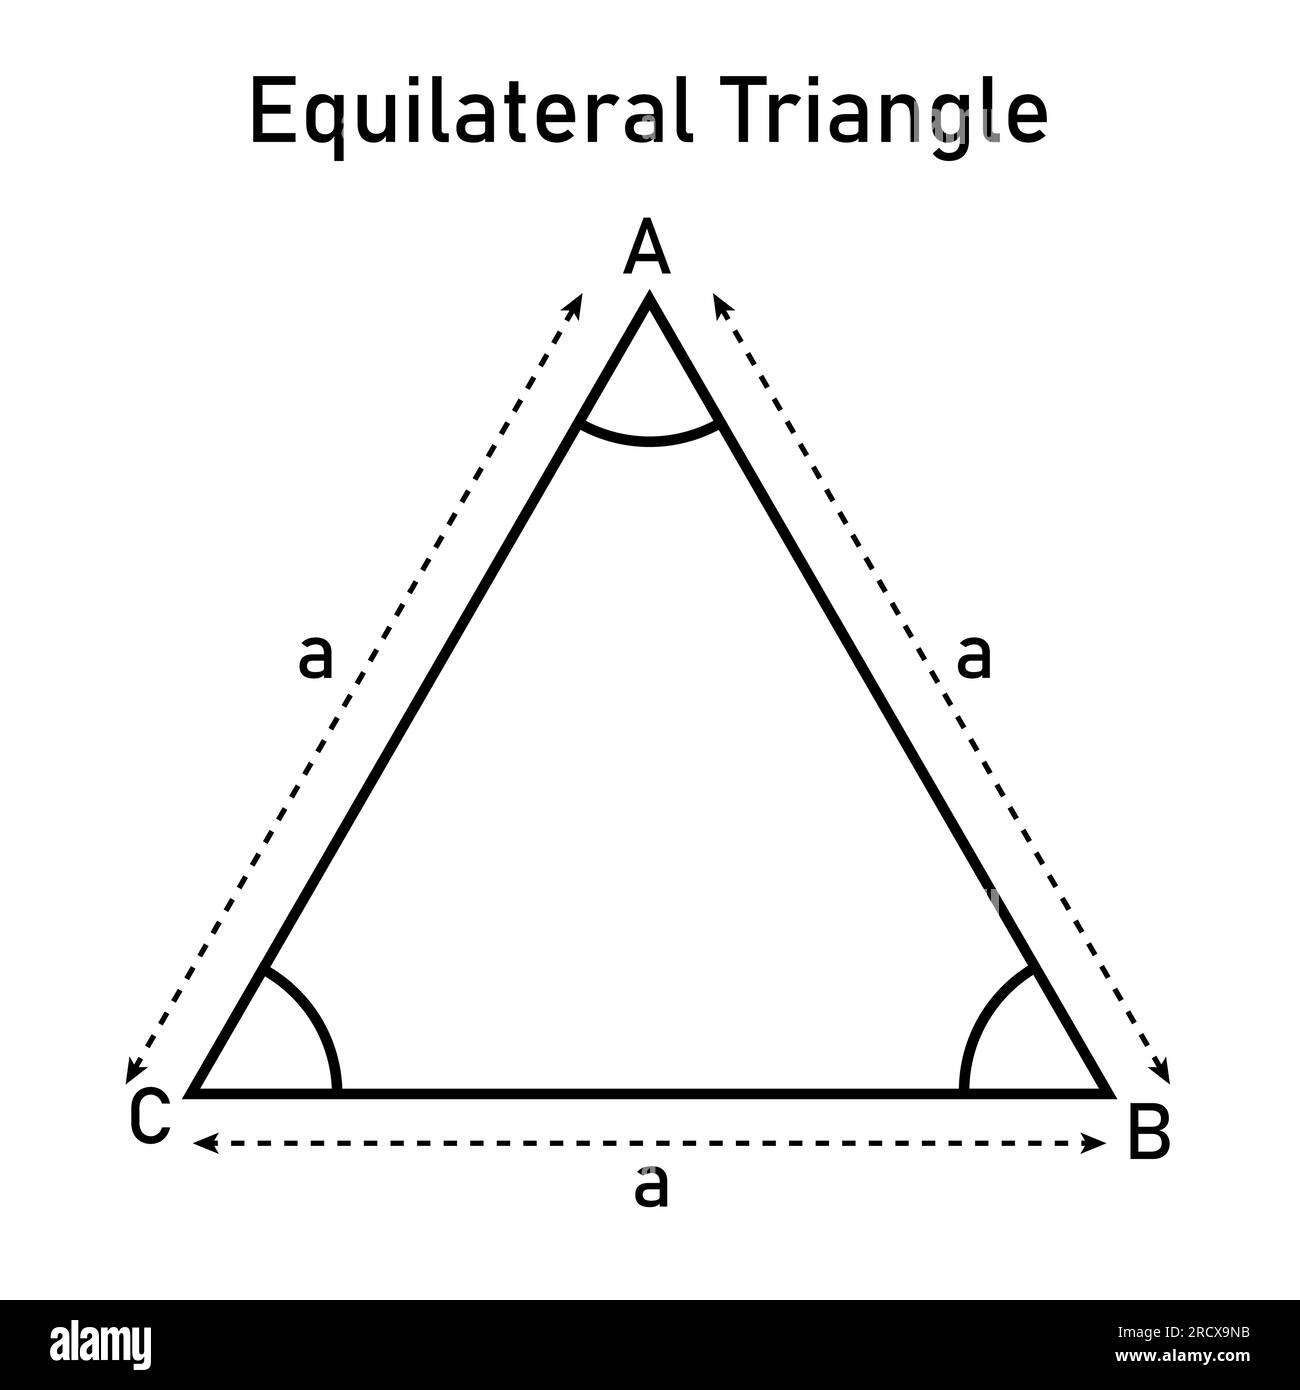 Properties of equilateral triangle in mathematics. Three sides with same length. Geometric shape. Vector illustration isolated on white background. Stock Vector